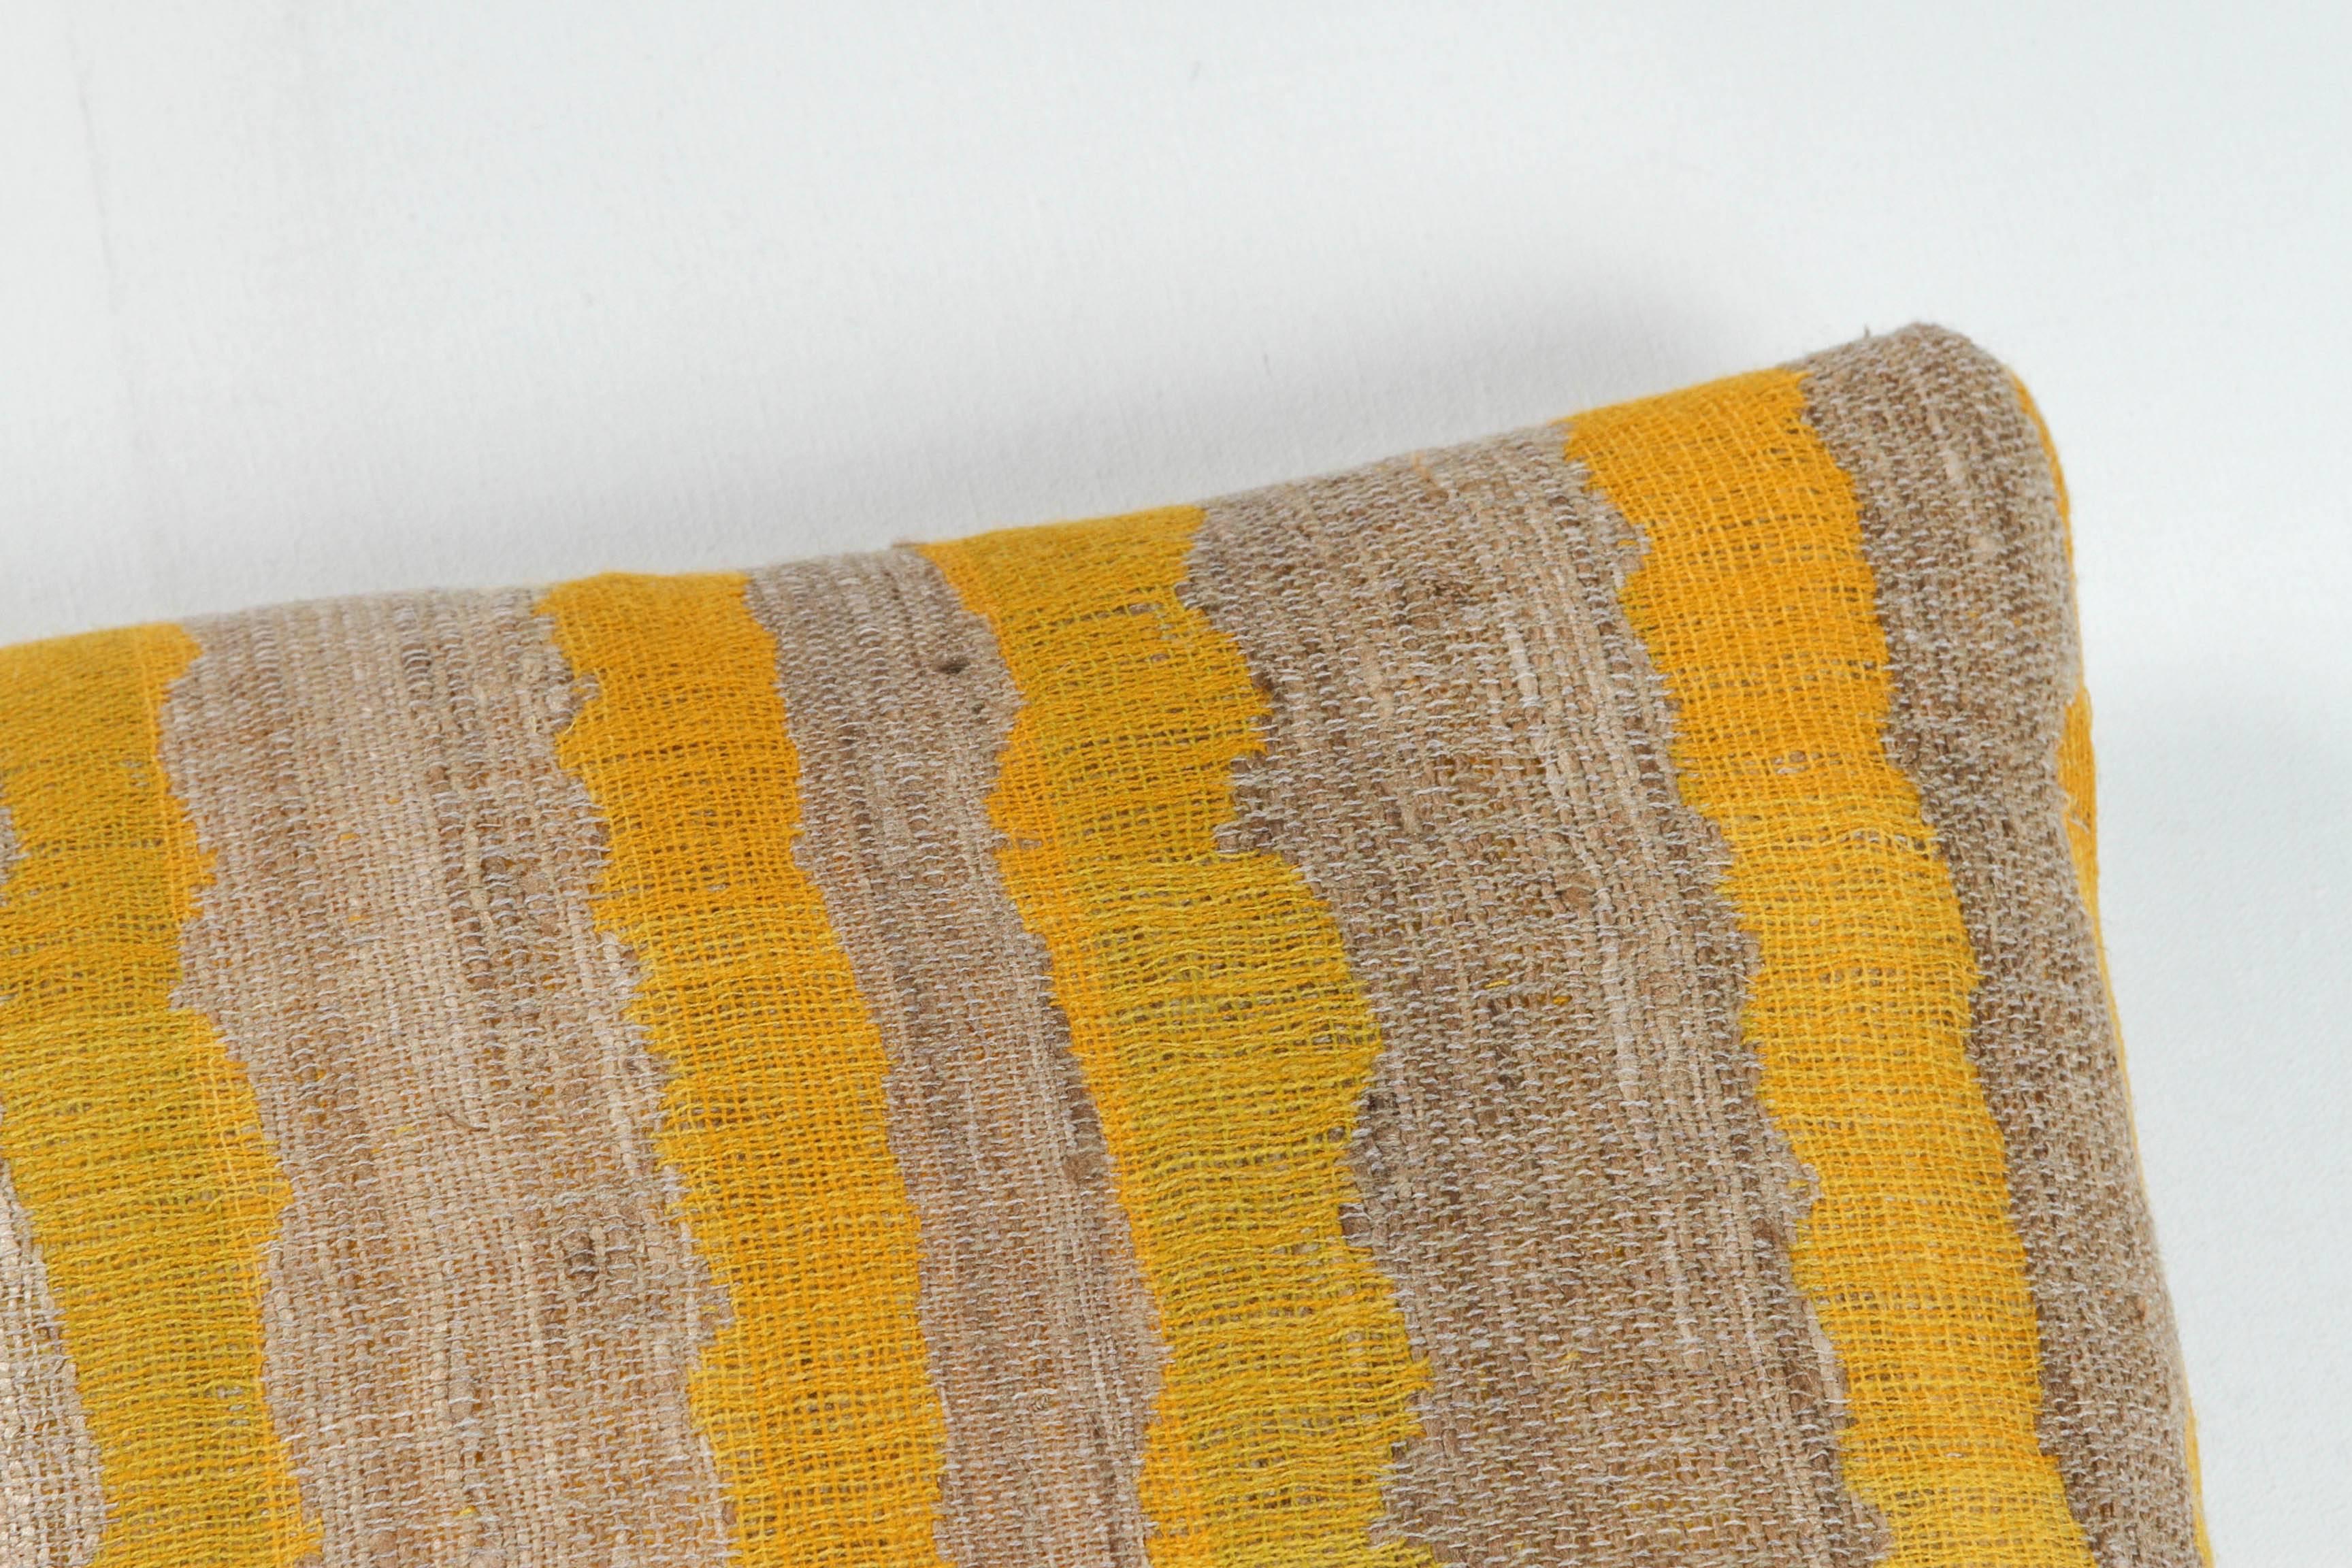 Indian Handwoven Pillow in Yellow and Oatmeal Color In Excellent Condition For Sale In Los Angeles, CA